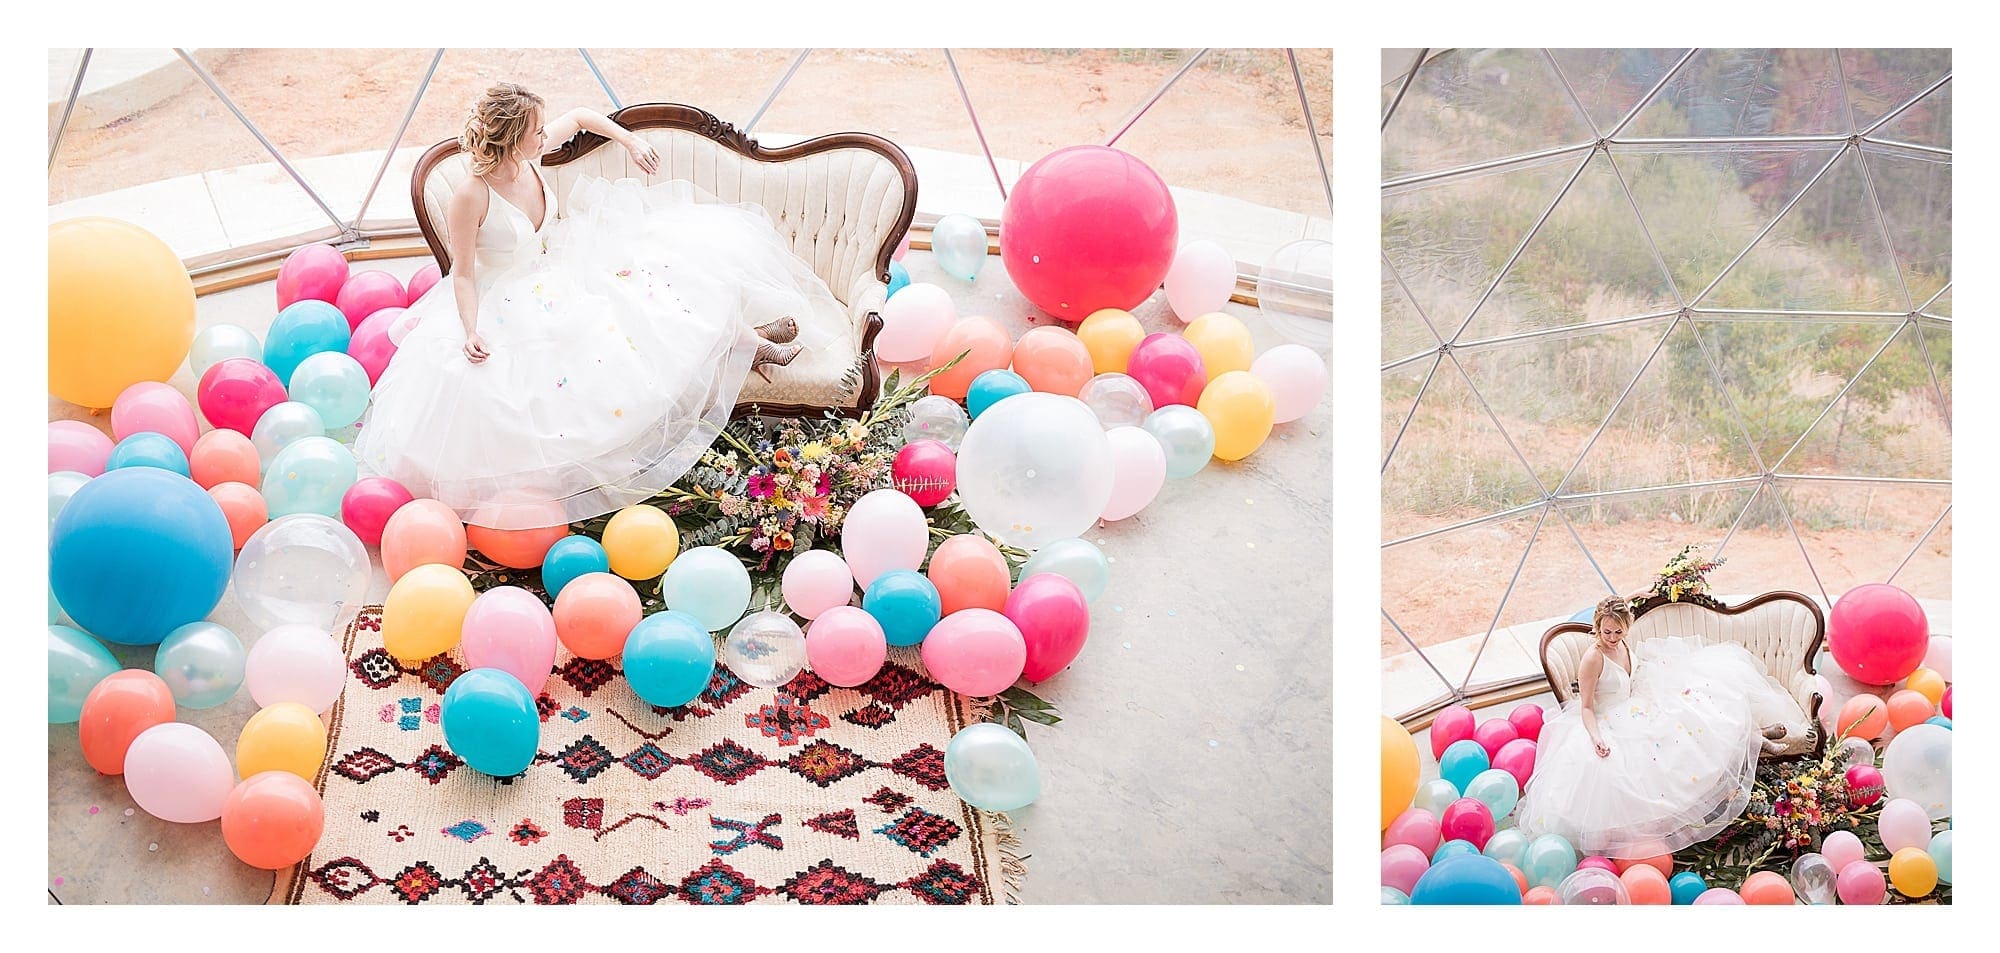 Bride sitting on vintage couch in wedding dress laughing surrounded by many multi colored balloons